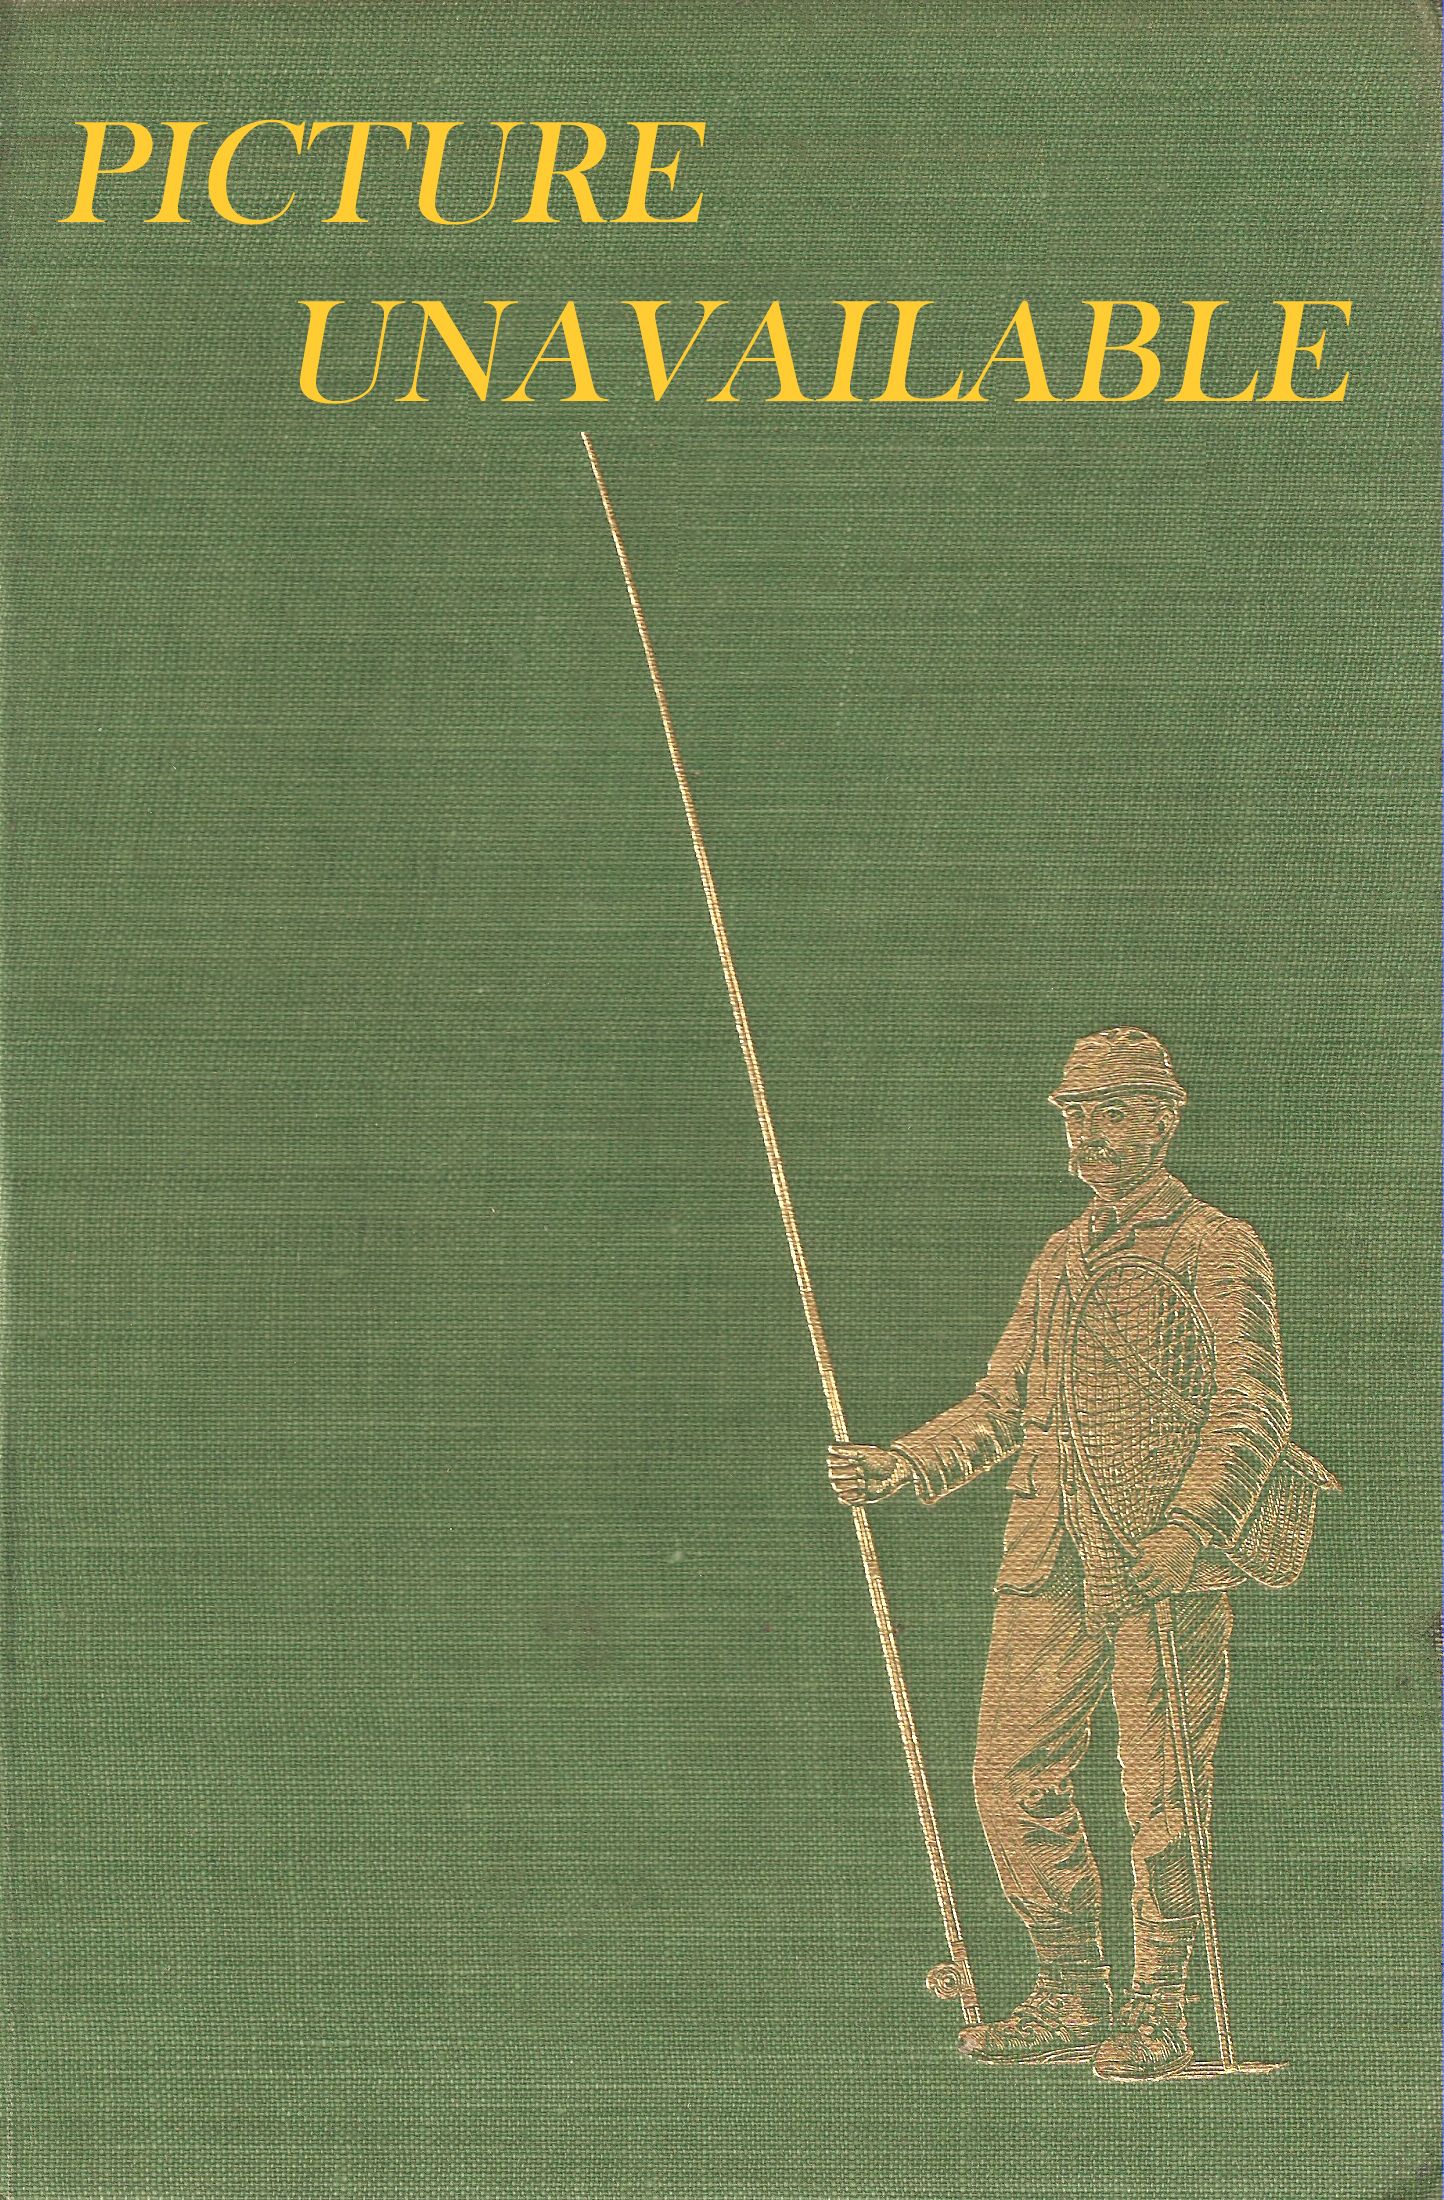 THE COMPLETE TROUT AND SALMON FISHERMAN. Edited by Jack Thorndike.